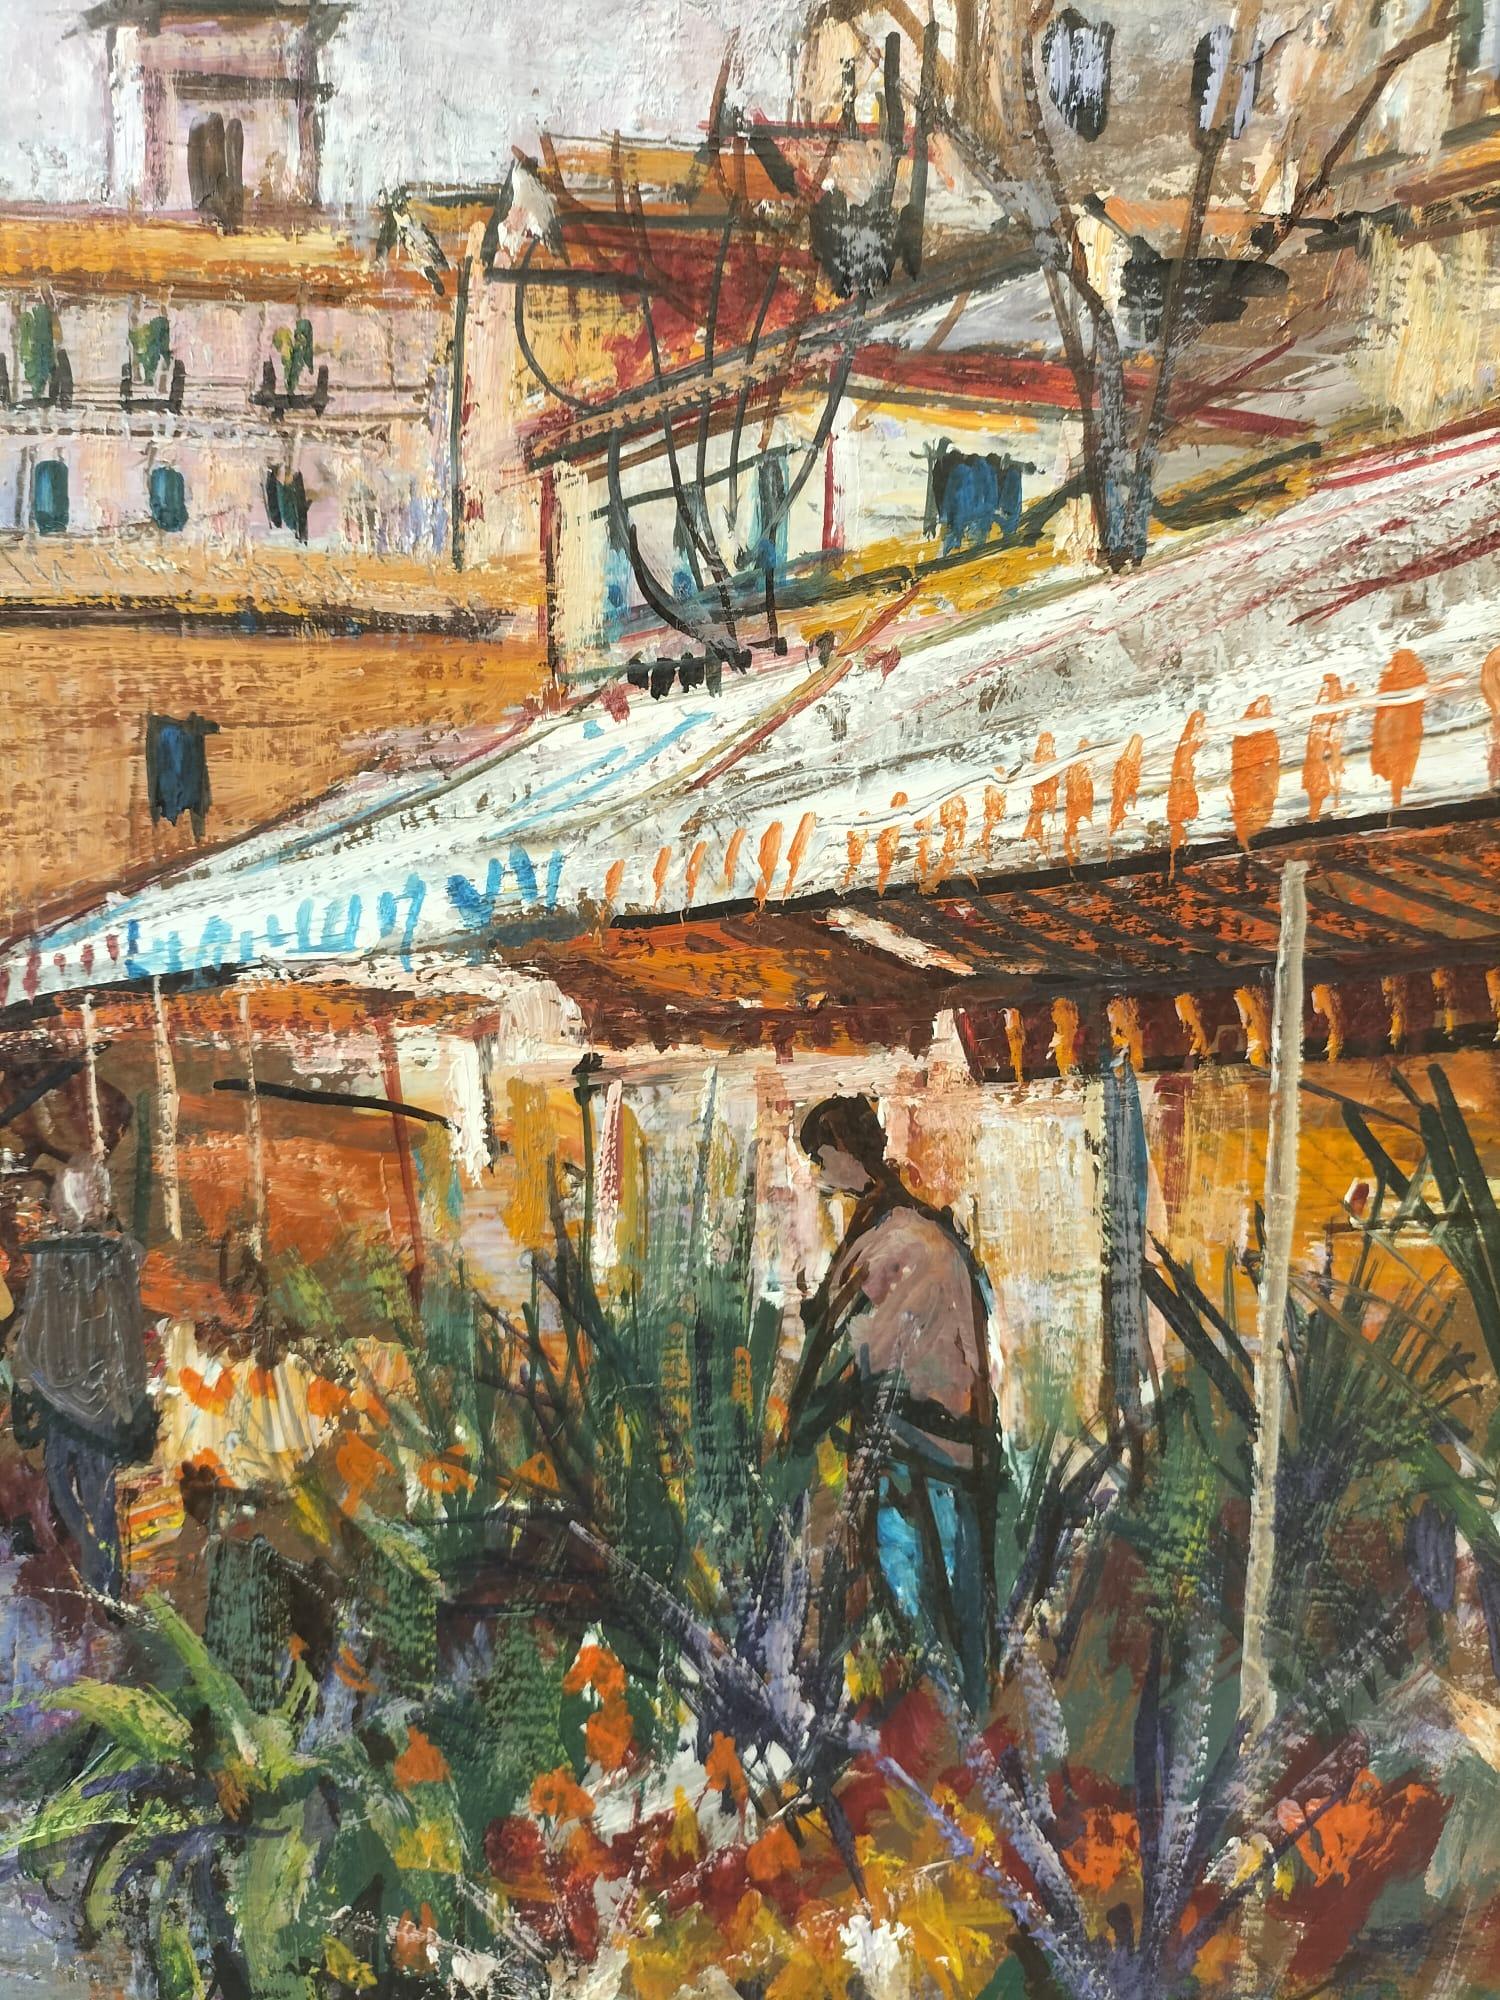 20th Century Modern Oil-on-Canvas Painting of a Flower Market by Cesar Boletti (1915-1995) For Sale